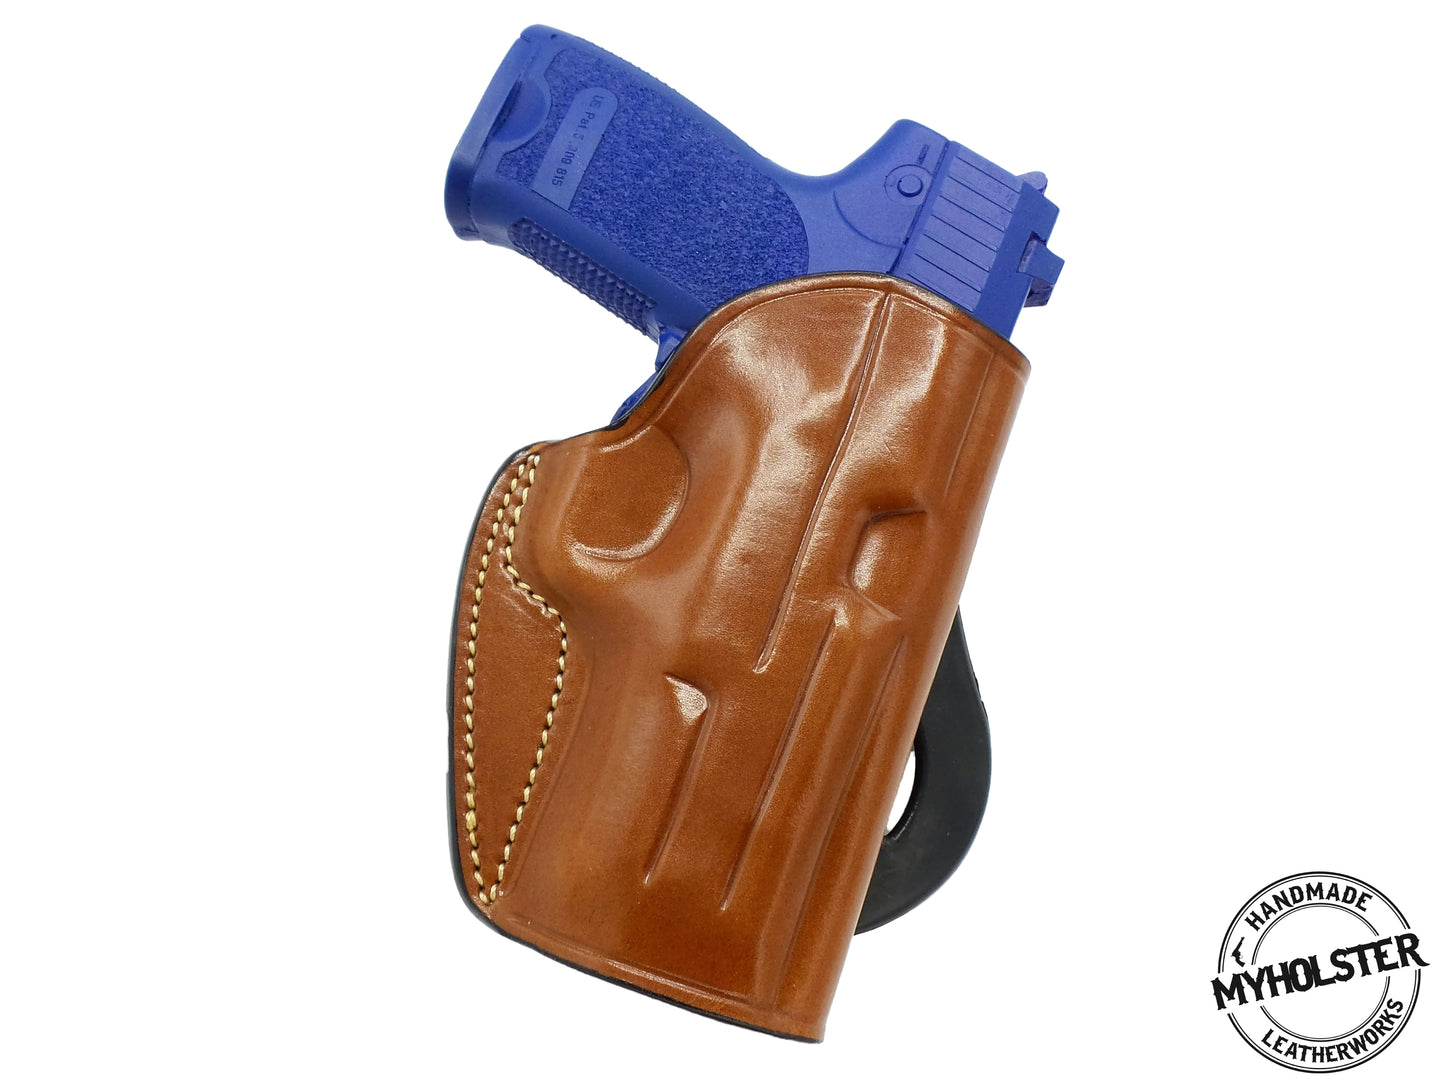 Sig Pro SP2340 .40 S&W OWB Leather Quick Draw Right Hand Paddle Holster - Choose Your Color